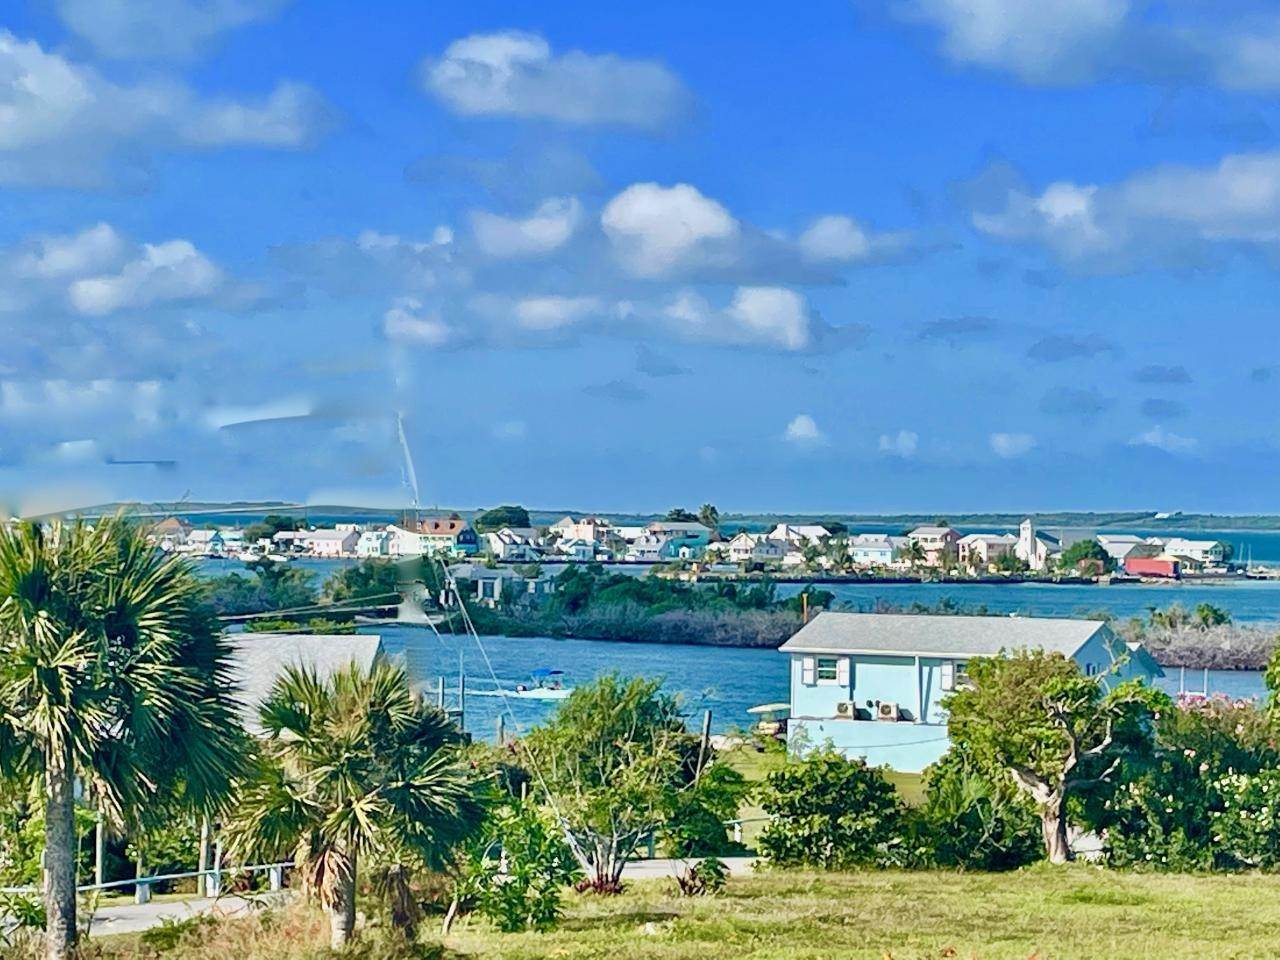 Lots / Acreage for Sale at Green Turtle Cay, Abaco, Bahamas